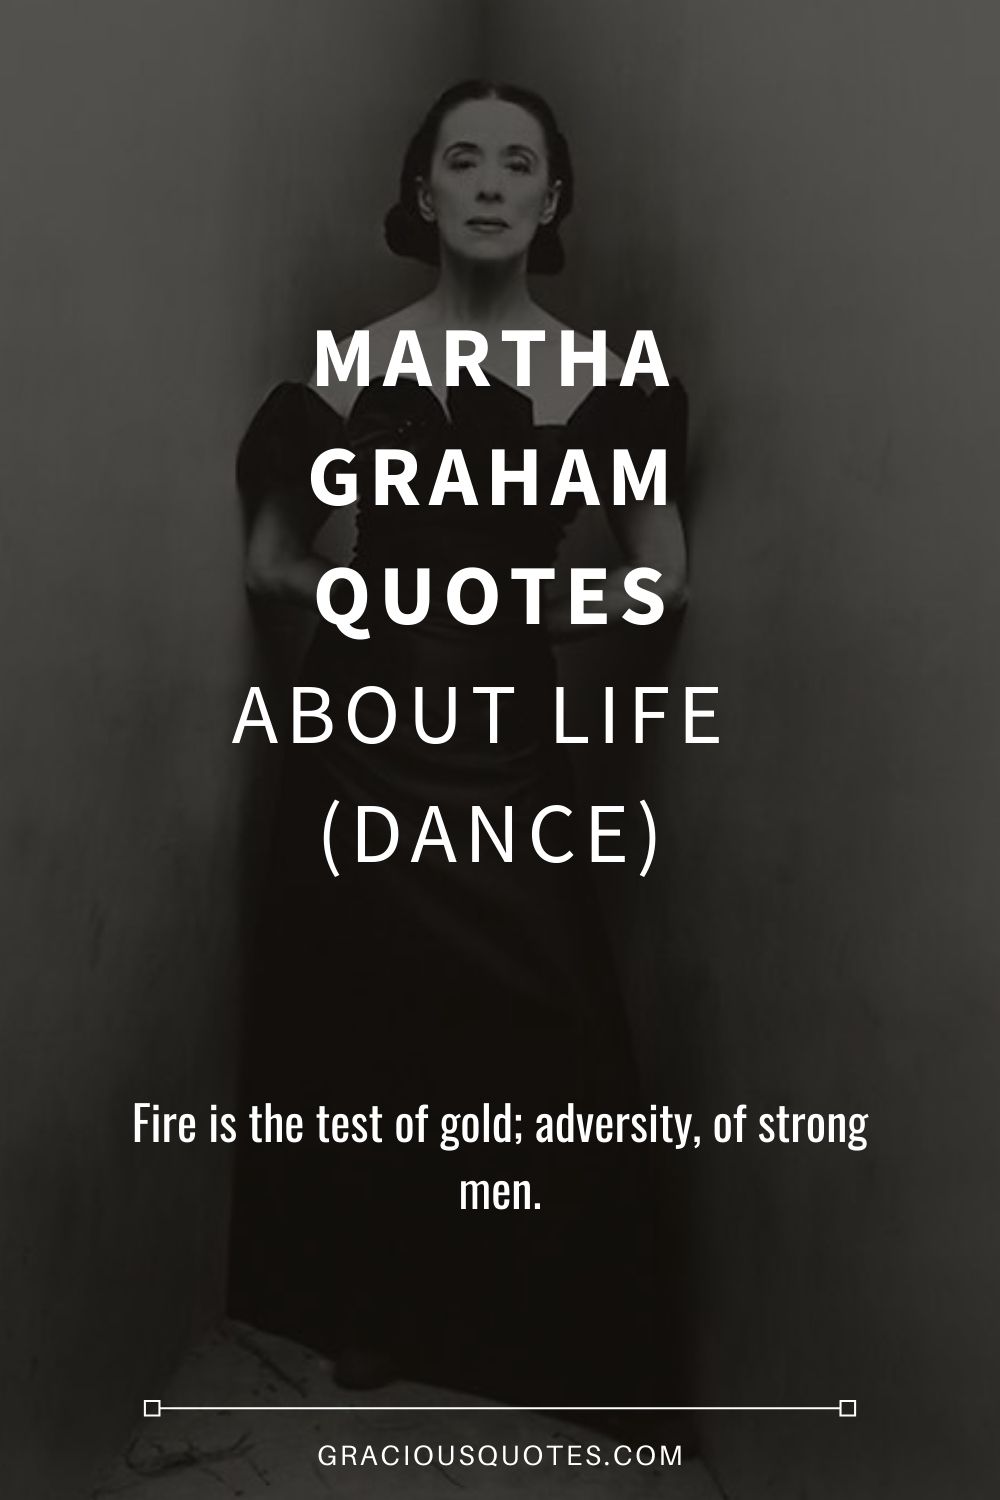 Martha Graham Quotes About Life (DANCE) - Gracious Quotes